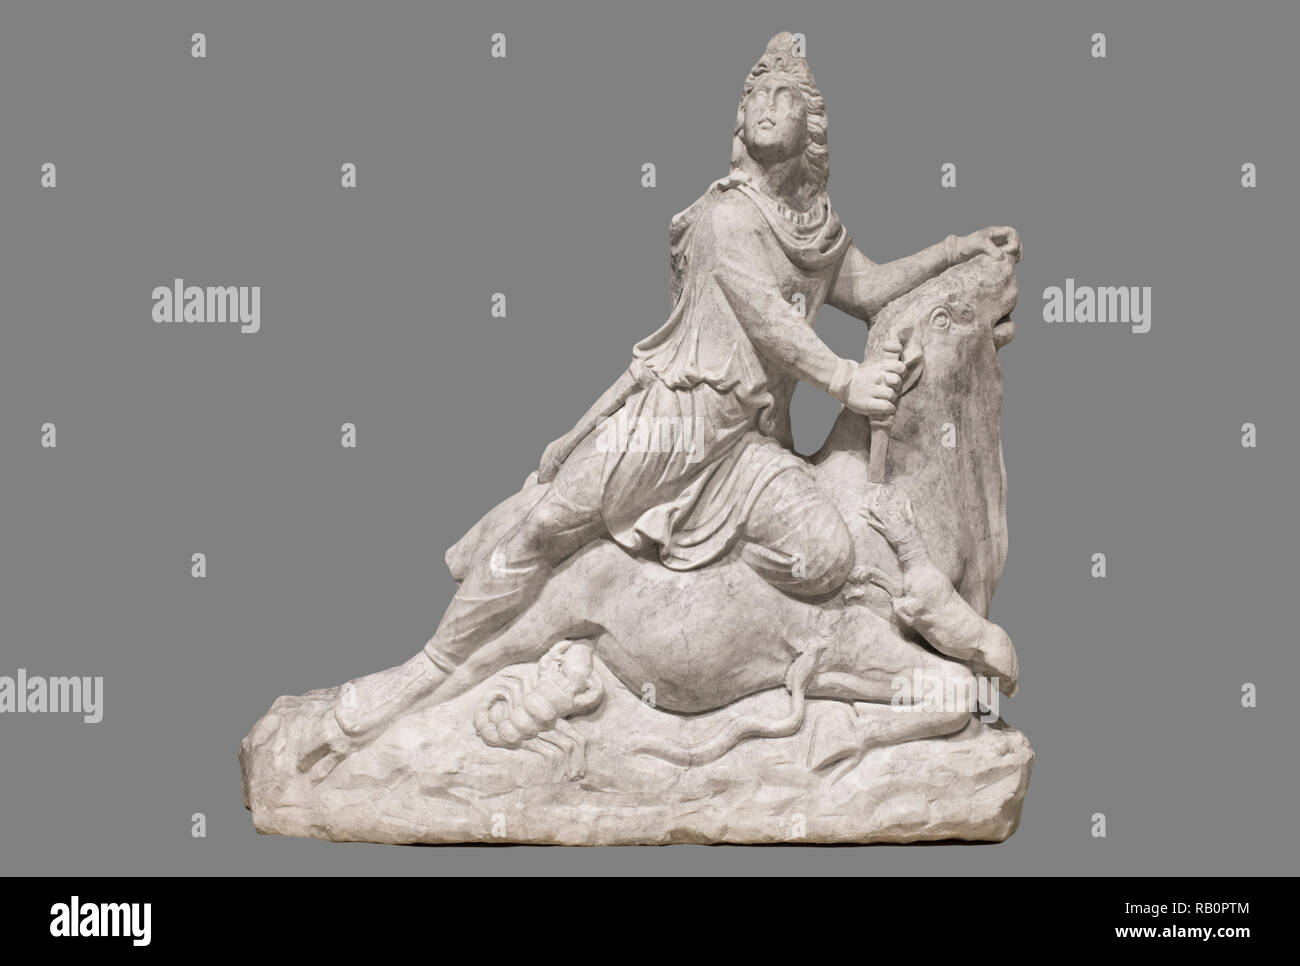 Cordoba, Spain - Sept 8th, 2018: Sculpture group of Mithras Tautoktonos from 2nd C. AC. Archaeological Museum of Cordoba, Spain Stock Photo